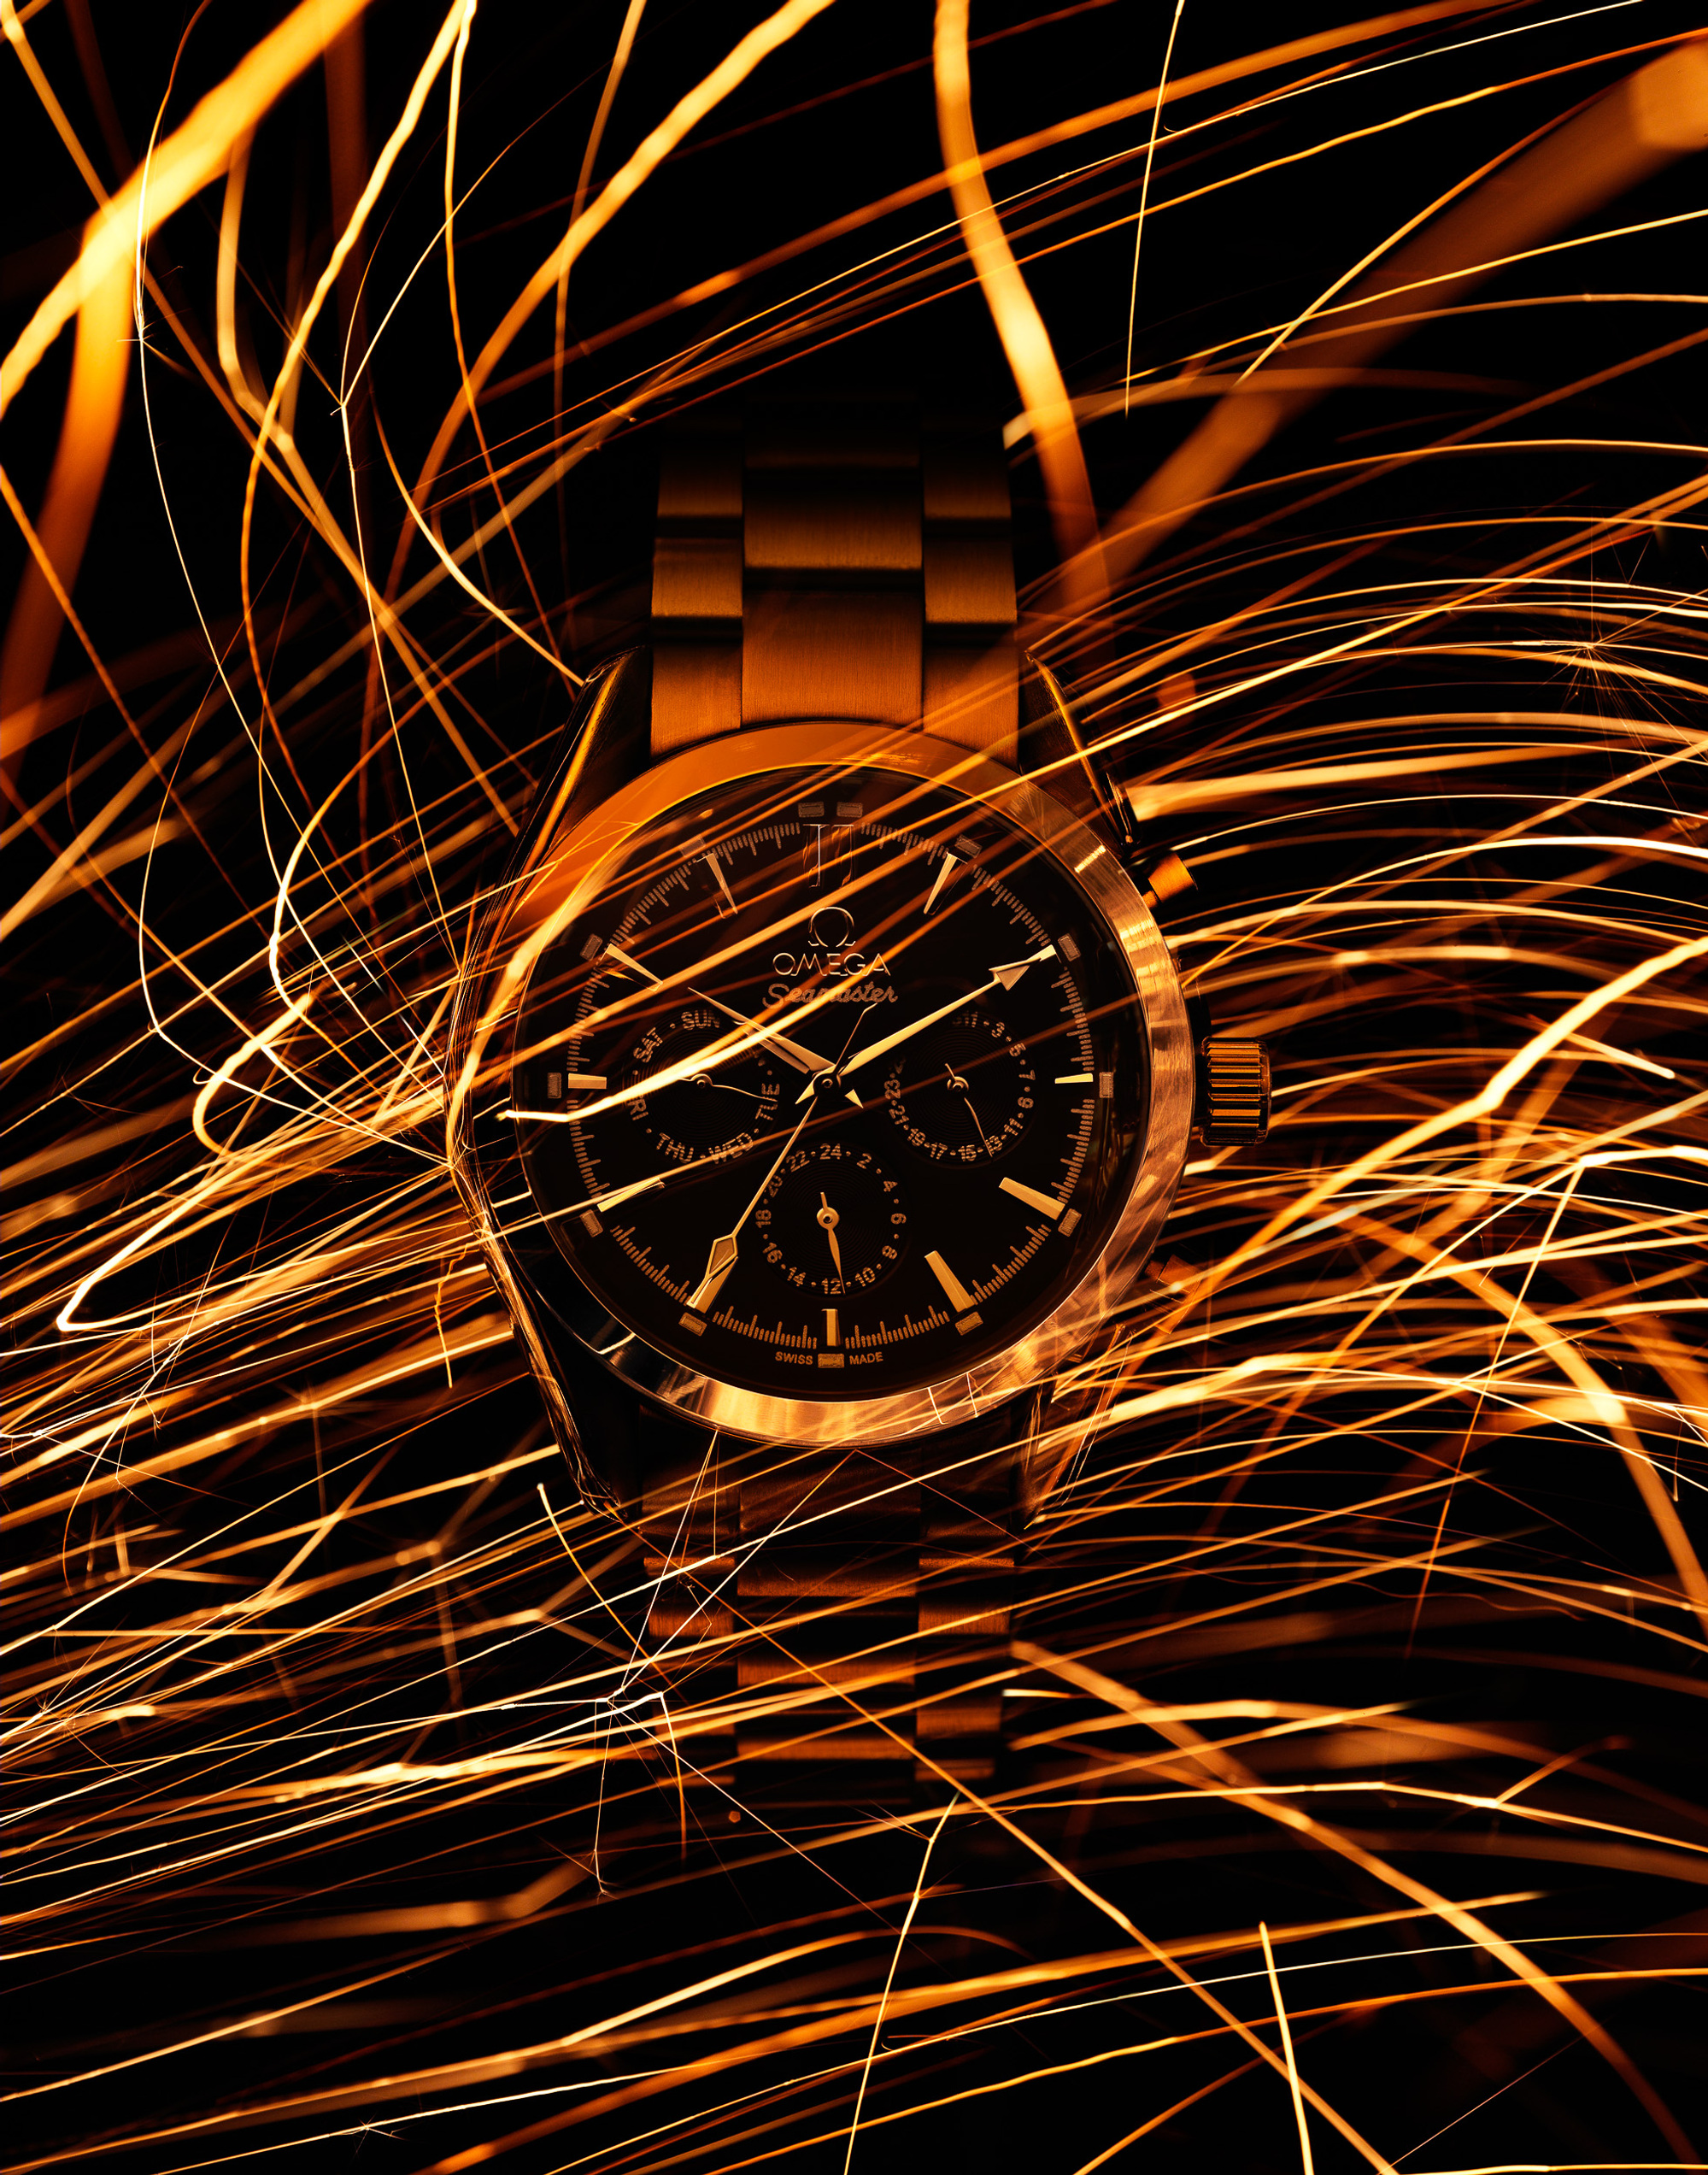 Omega Watch by commercial product & advertising photographer Timothy Hogan in Los Angeles